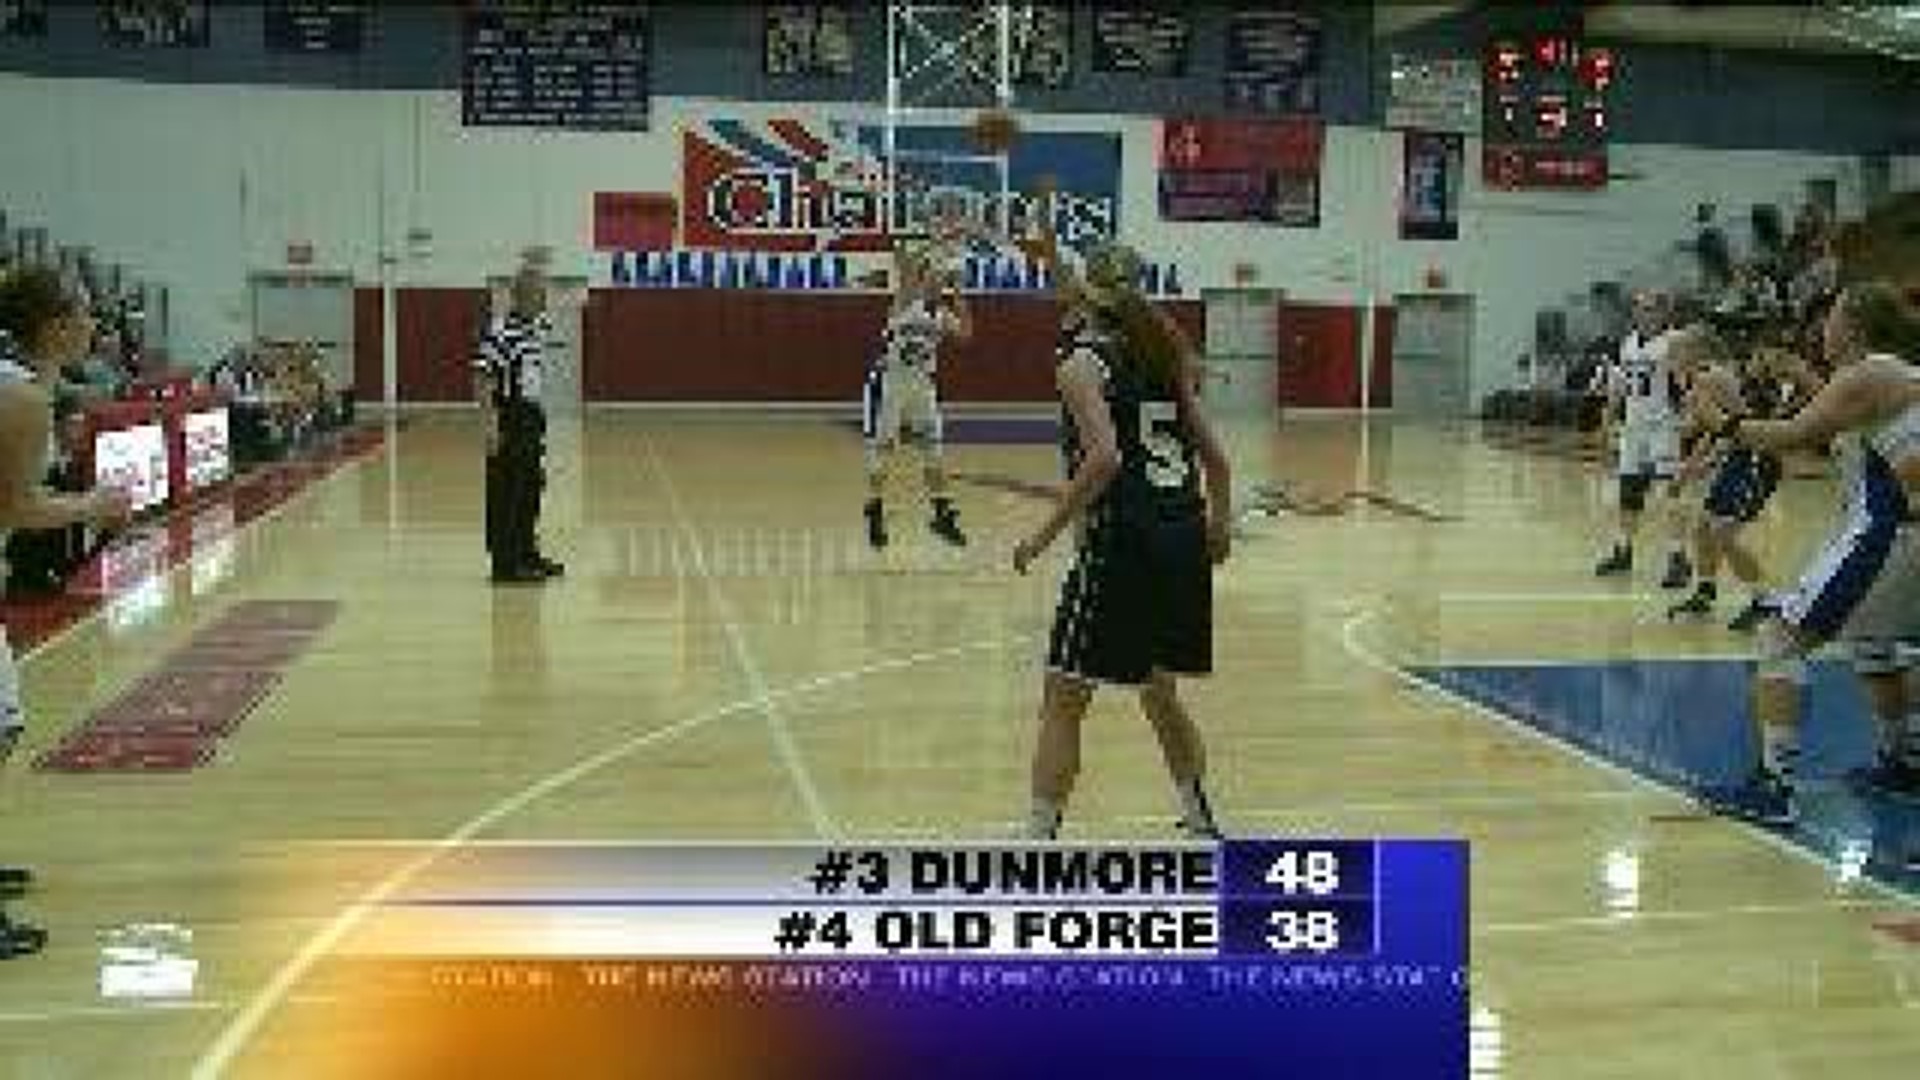 #3 Dunmore vs #4 Old Forge